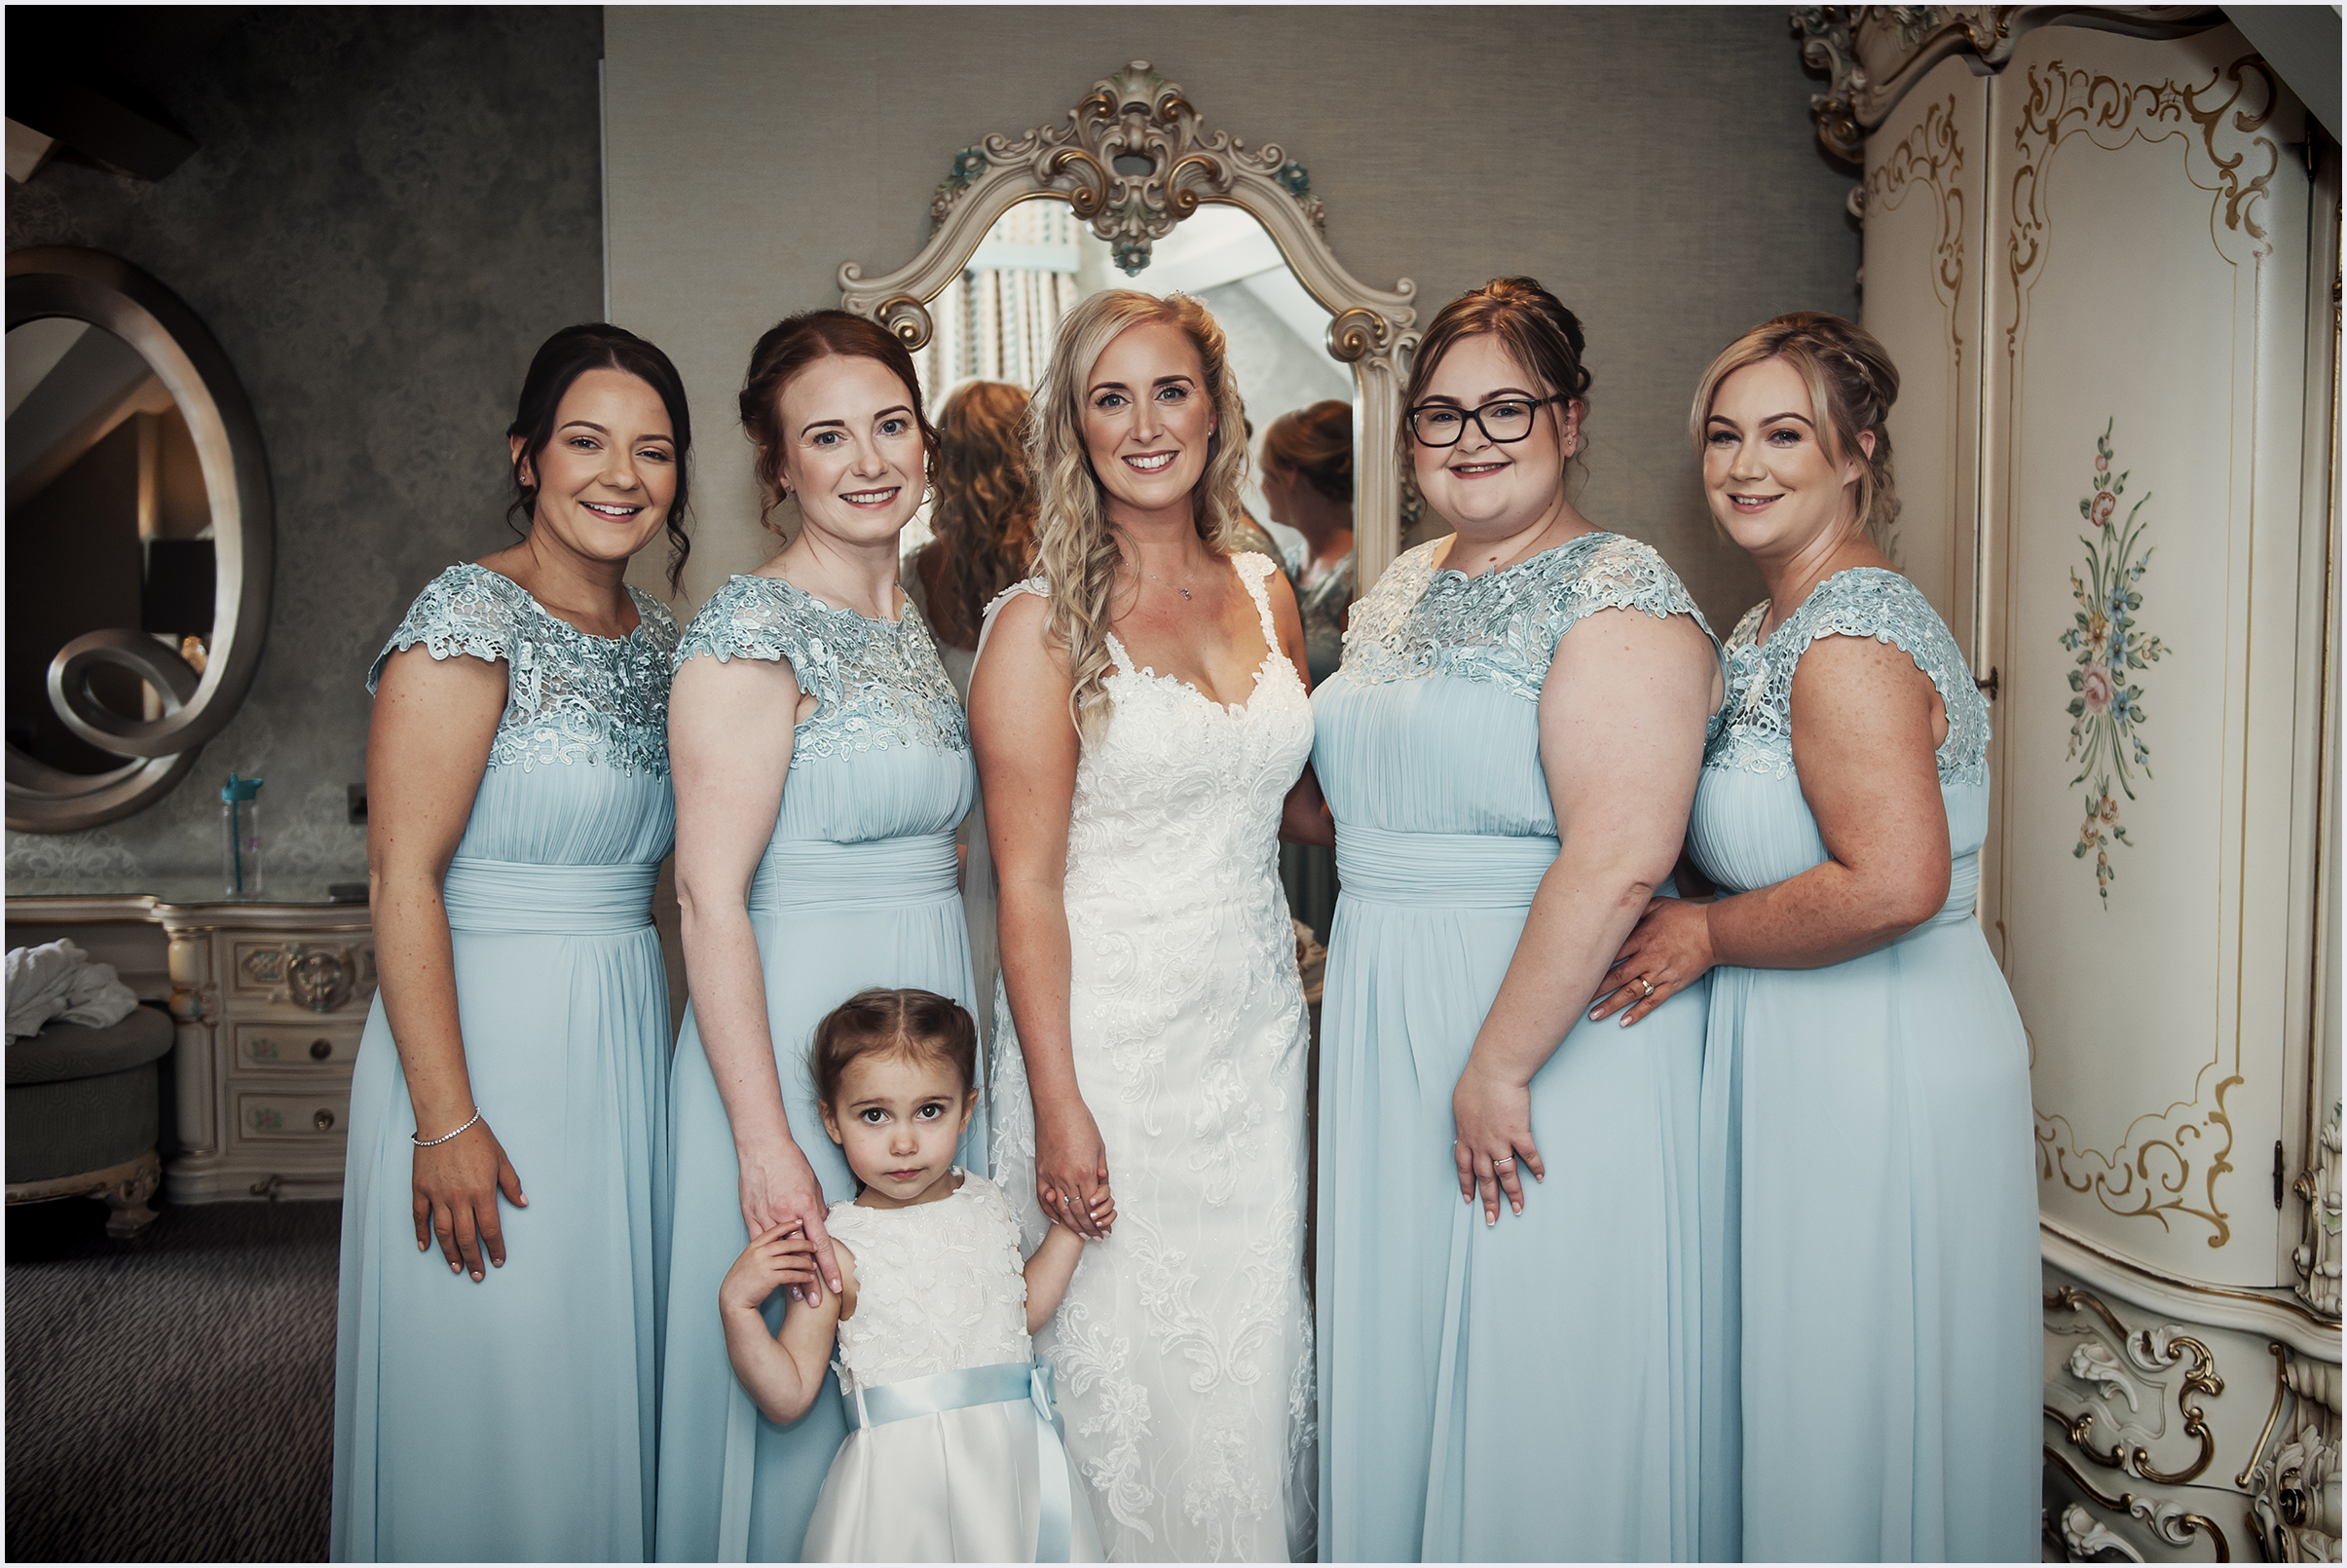 A bride poses with her four bridesmaids and flower girl before her wedding.